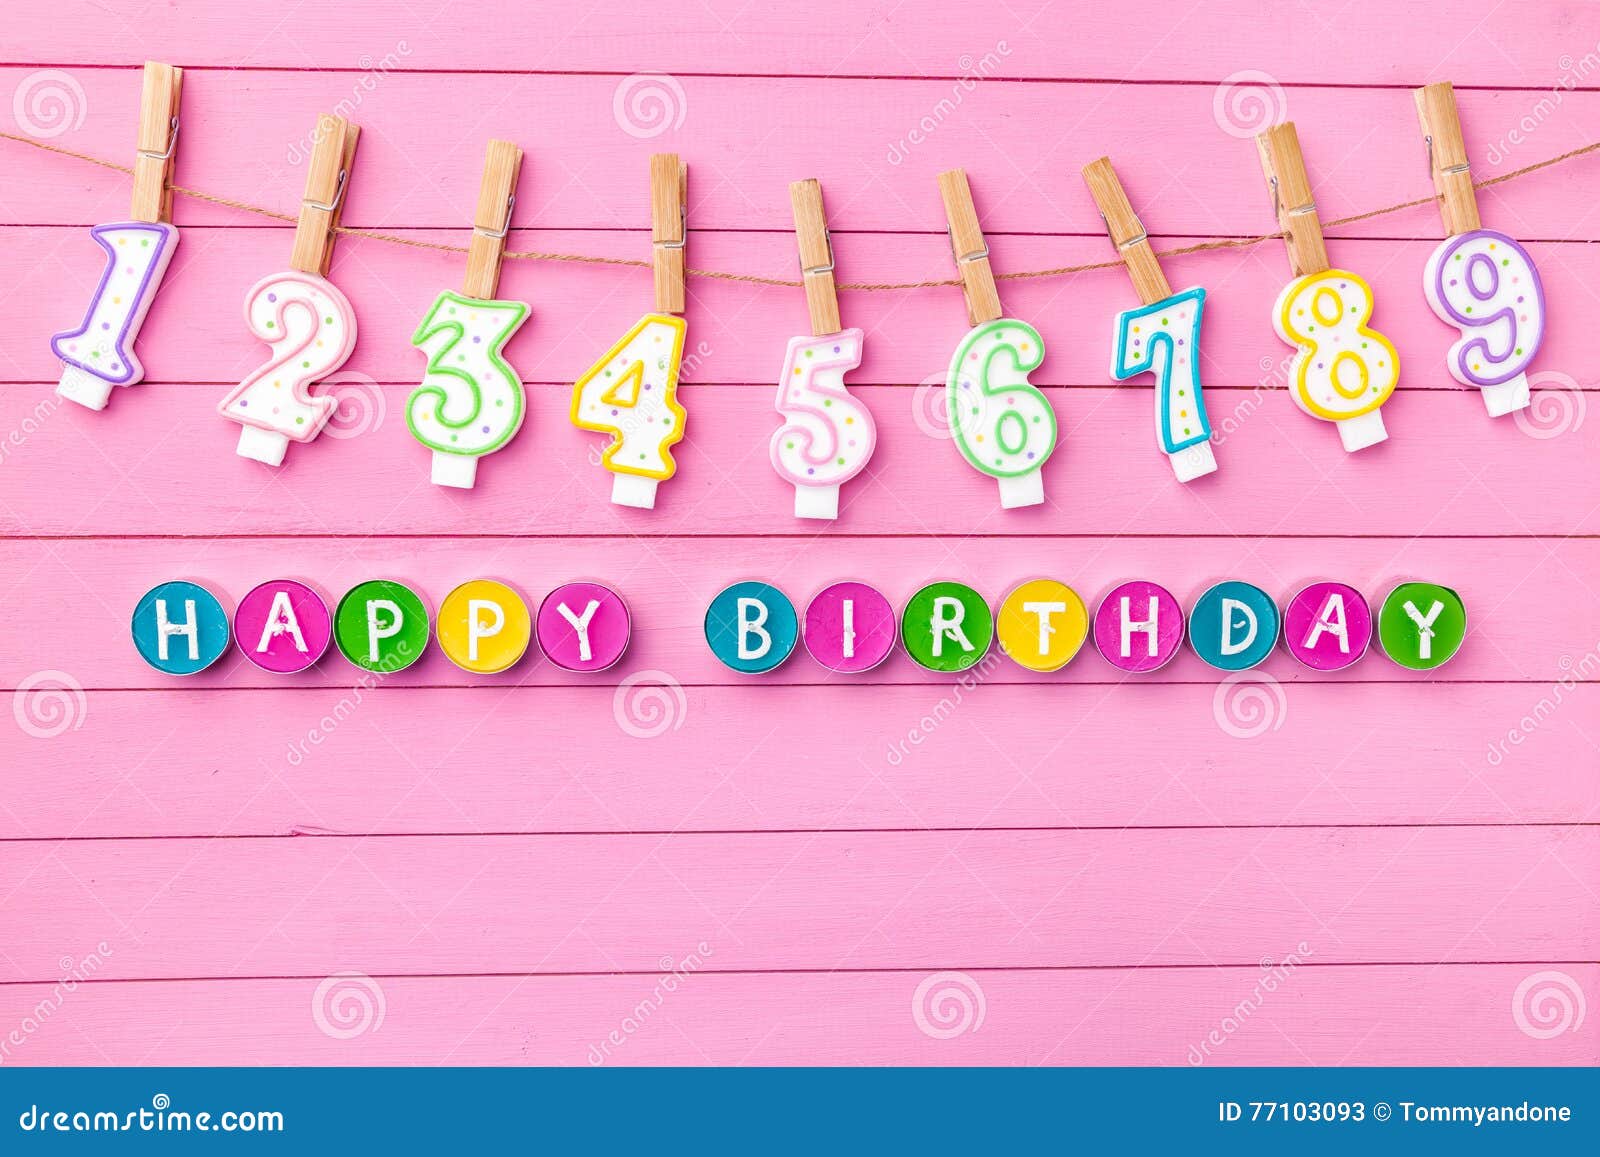 Colorful Happy Birthday Background Stock Image - Image of confetti ...